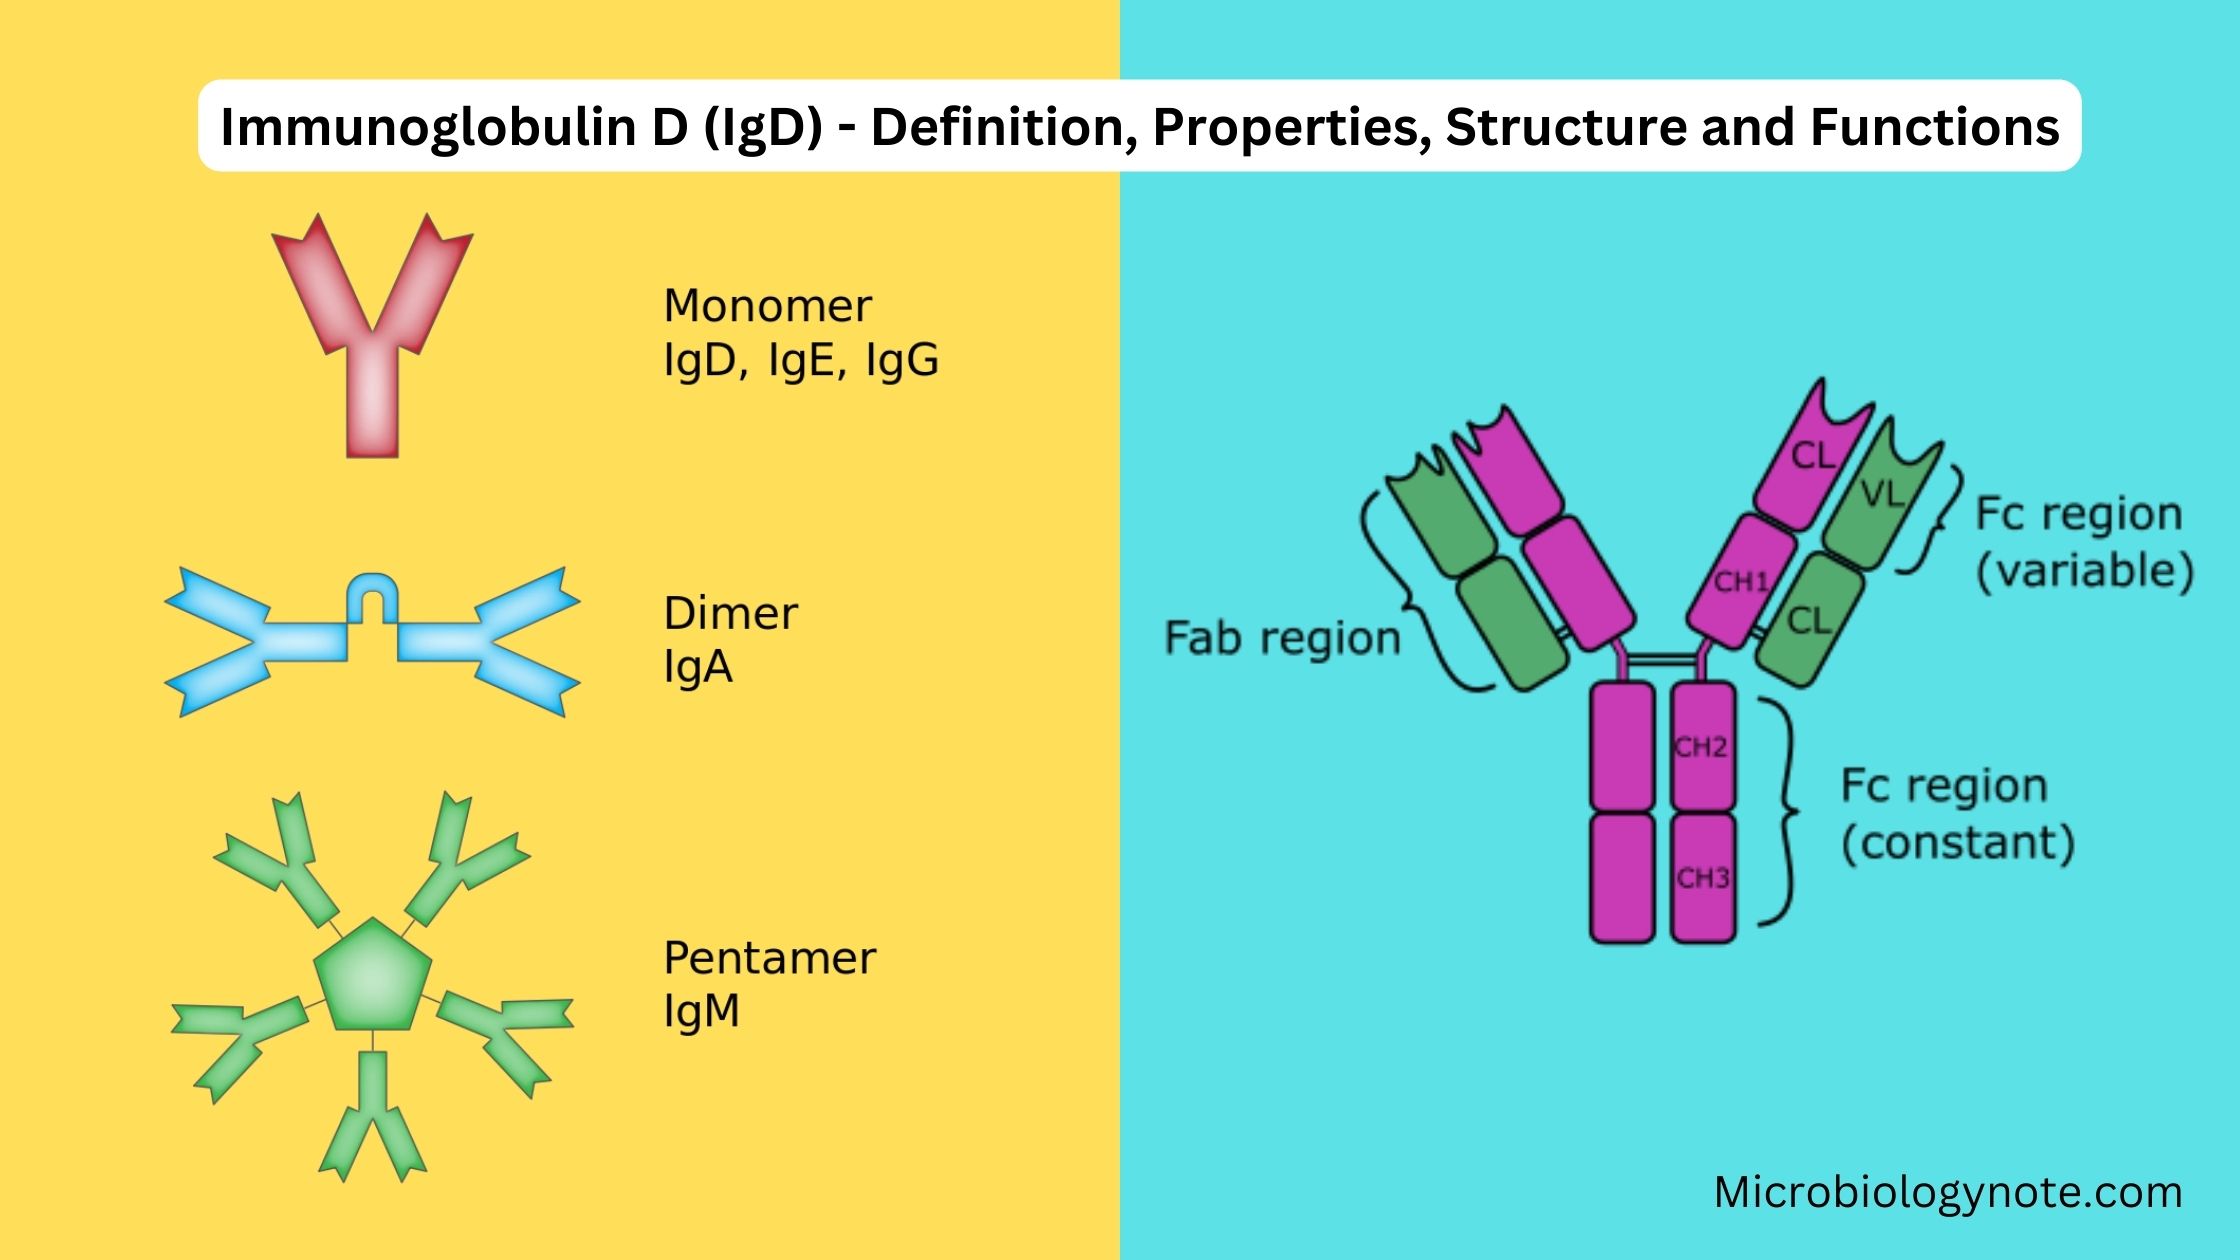 Immunoglobulin D (IgD) - Definition, Properties, Structure and Functions